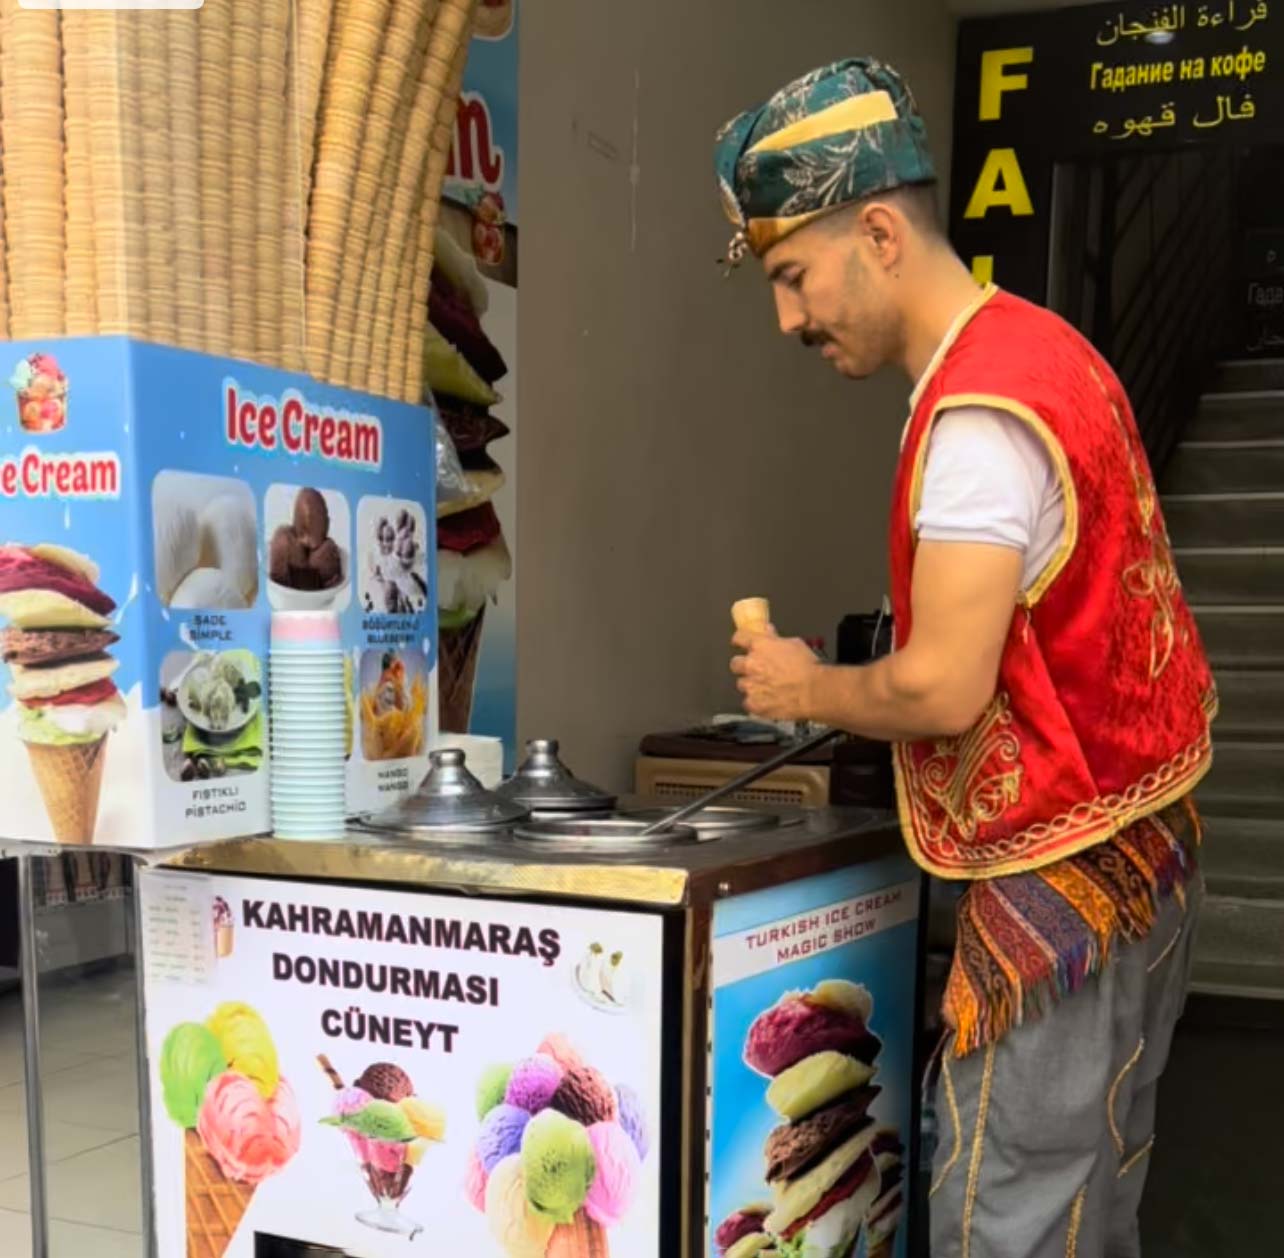 A man scoops ice cream from a cart in Istanbul.